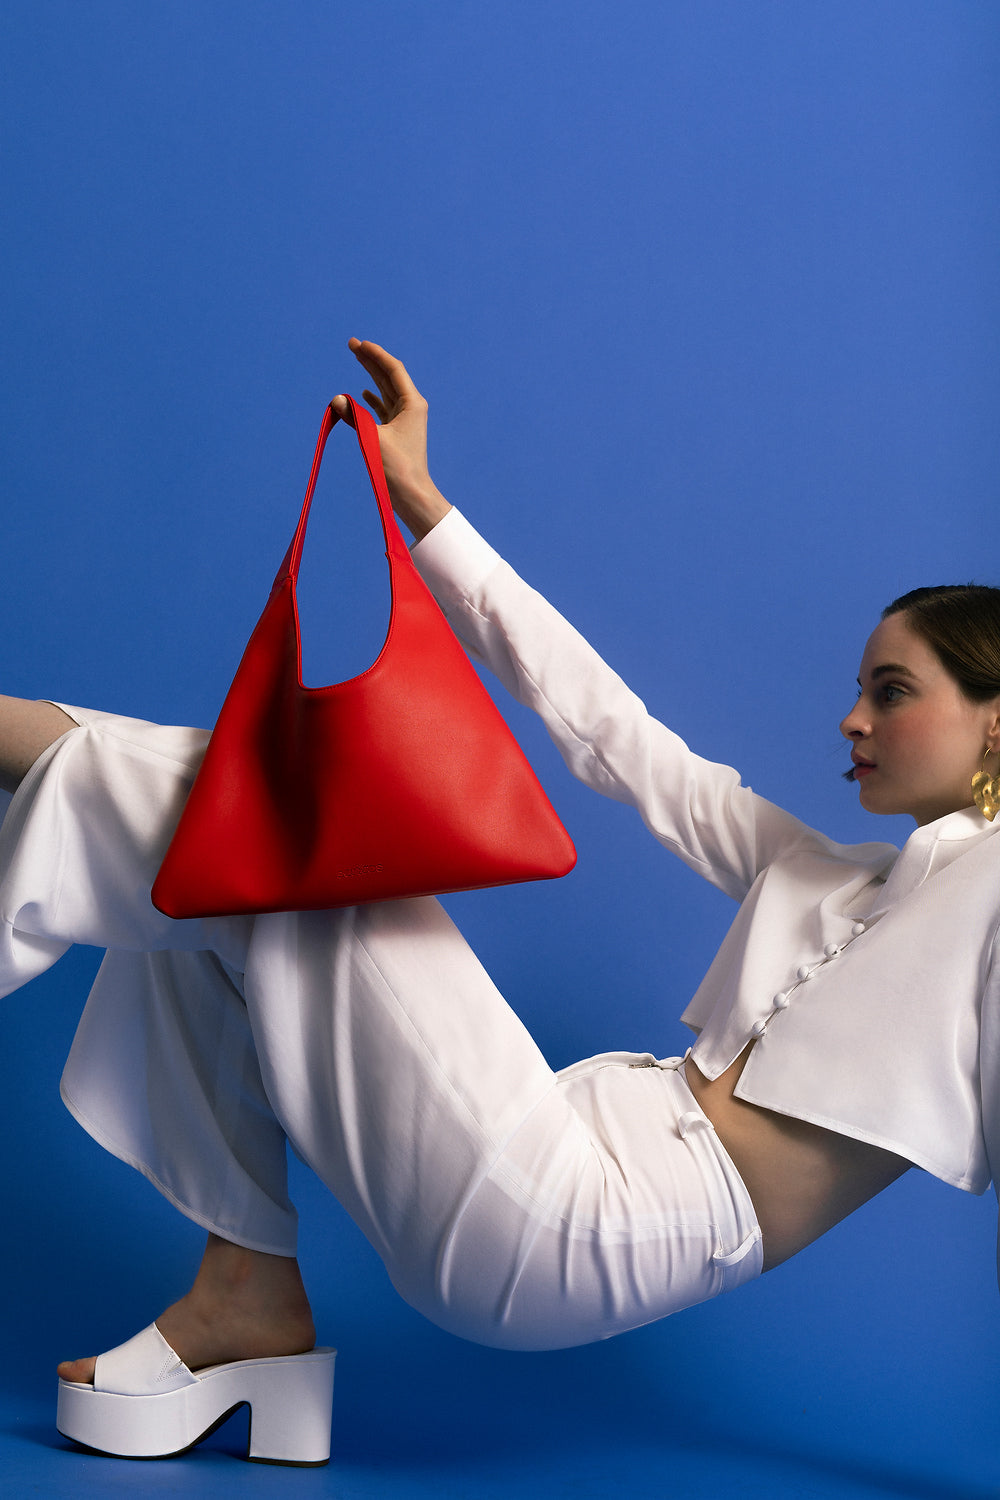 Agave Triangular Tote | Tomato Red